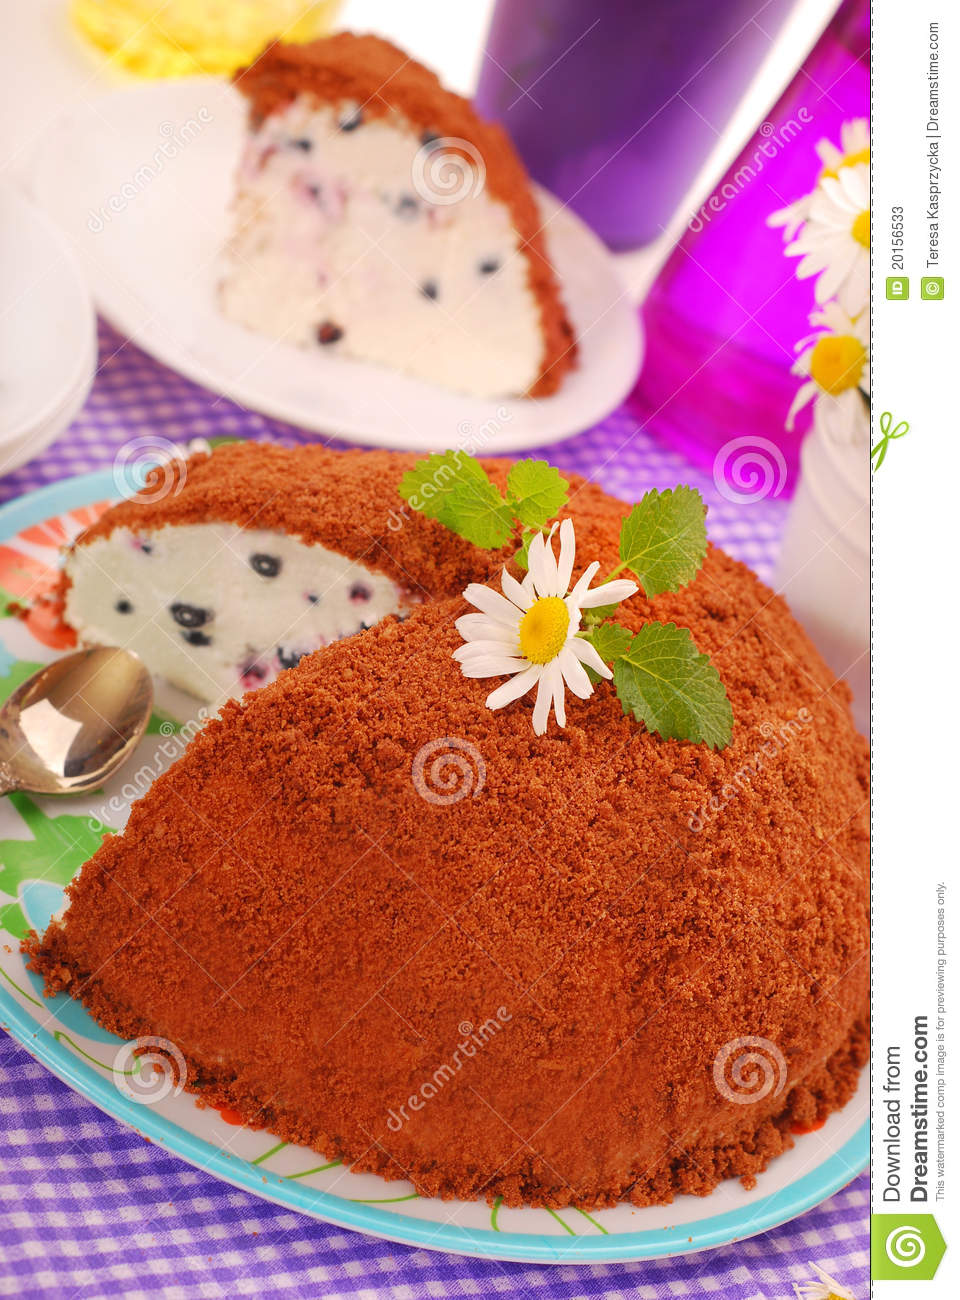 Blueberry Cake With Chocolate Crumble Topping Stock Photos   Image